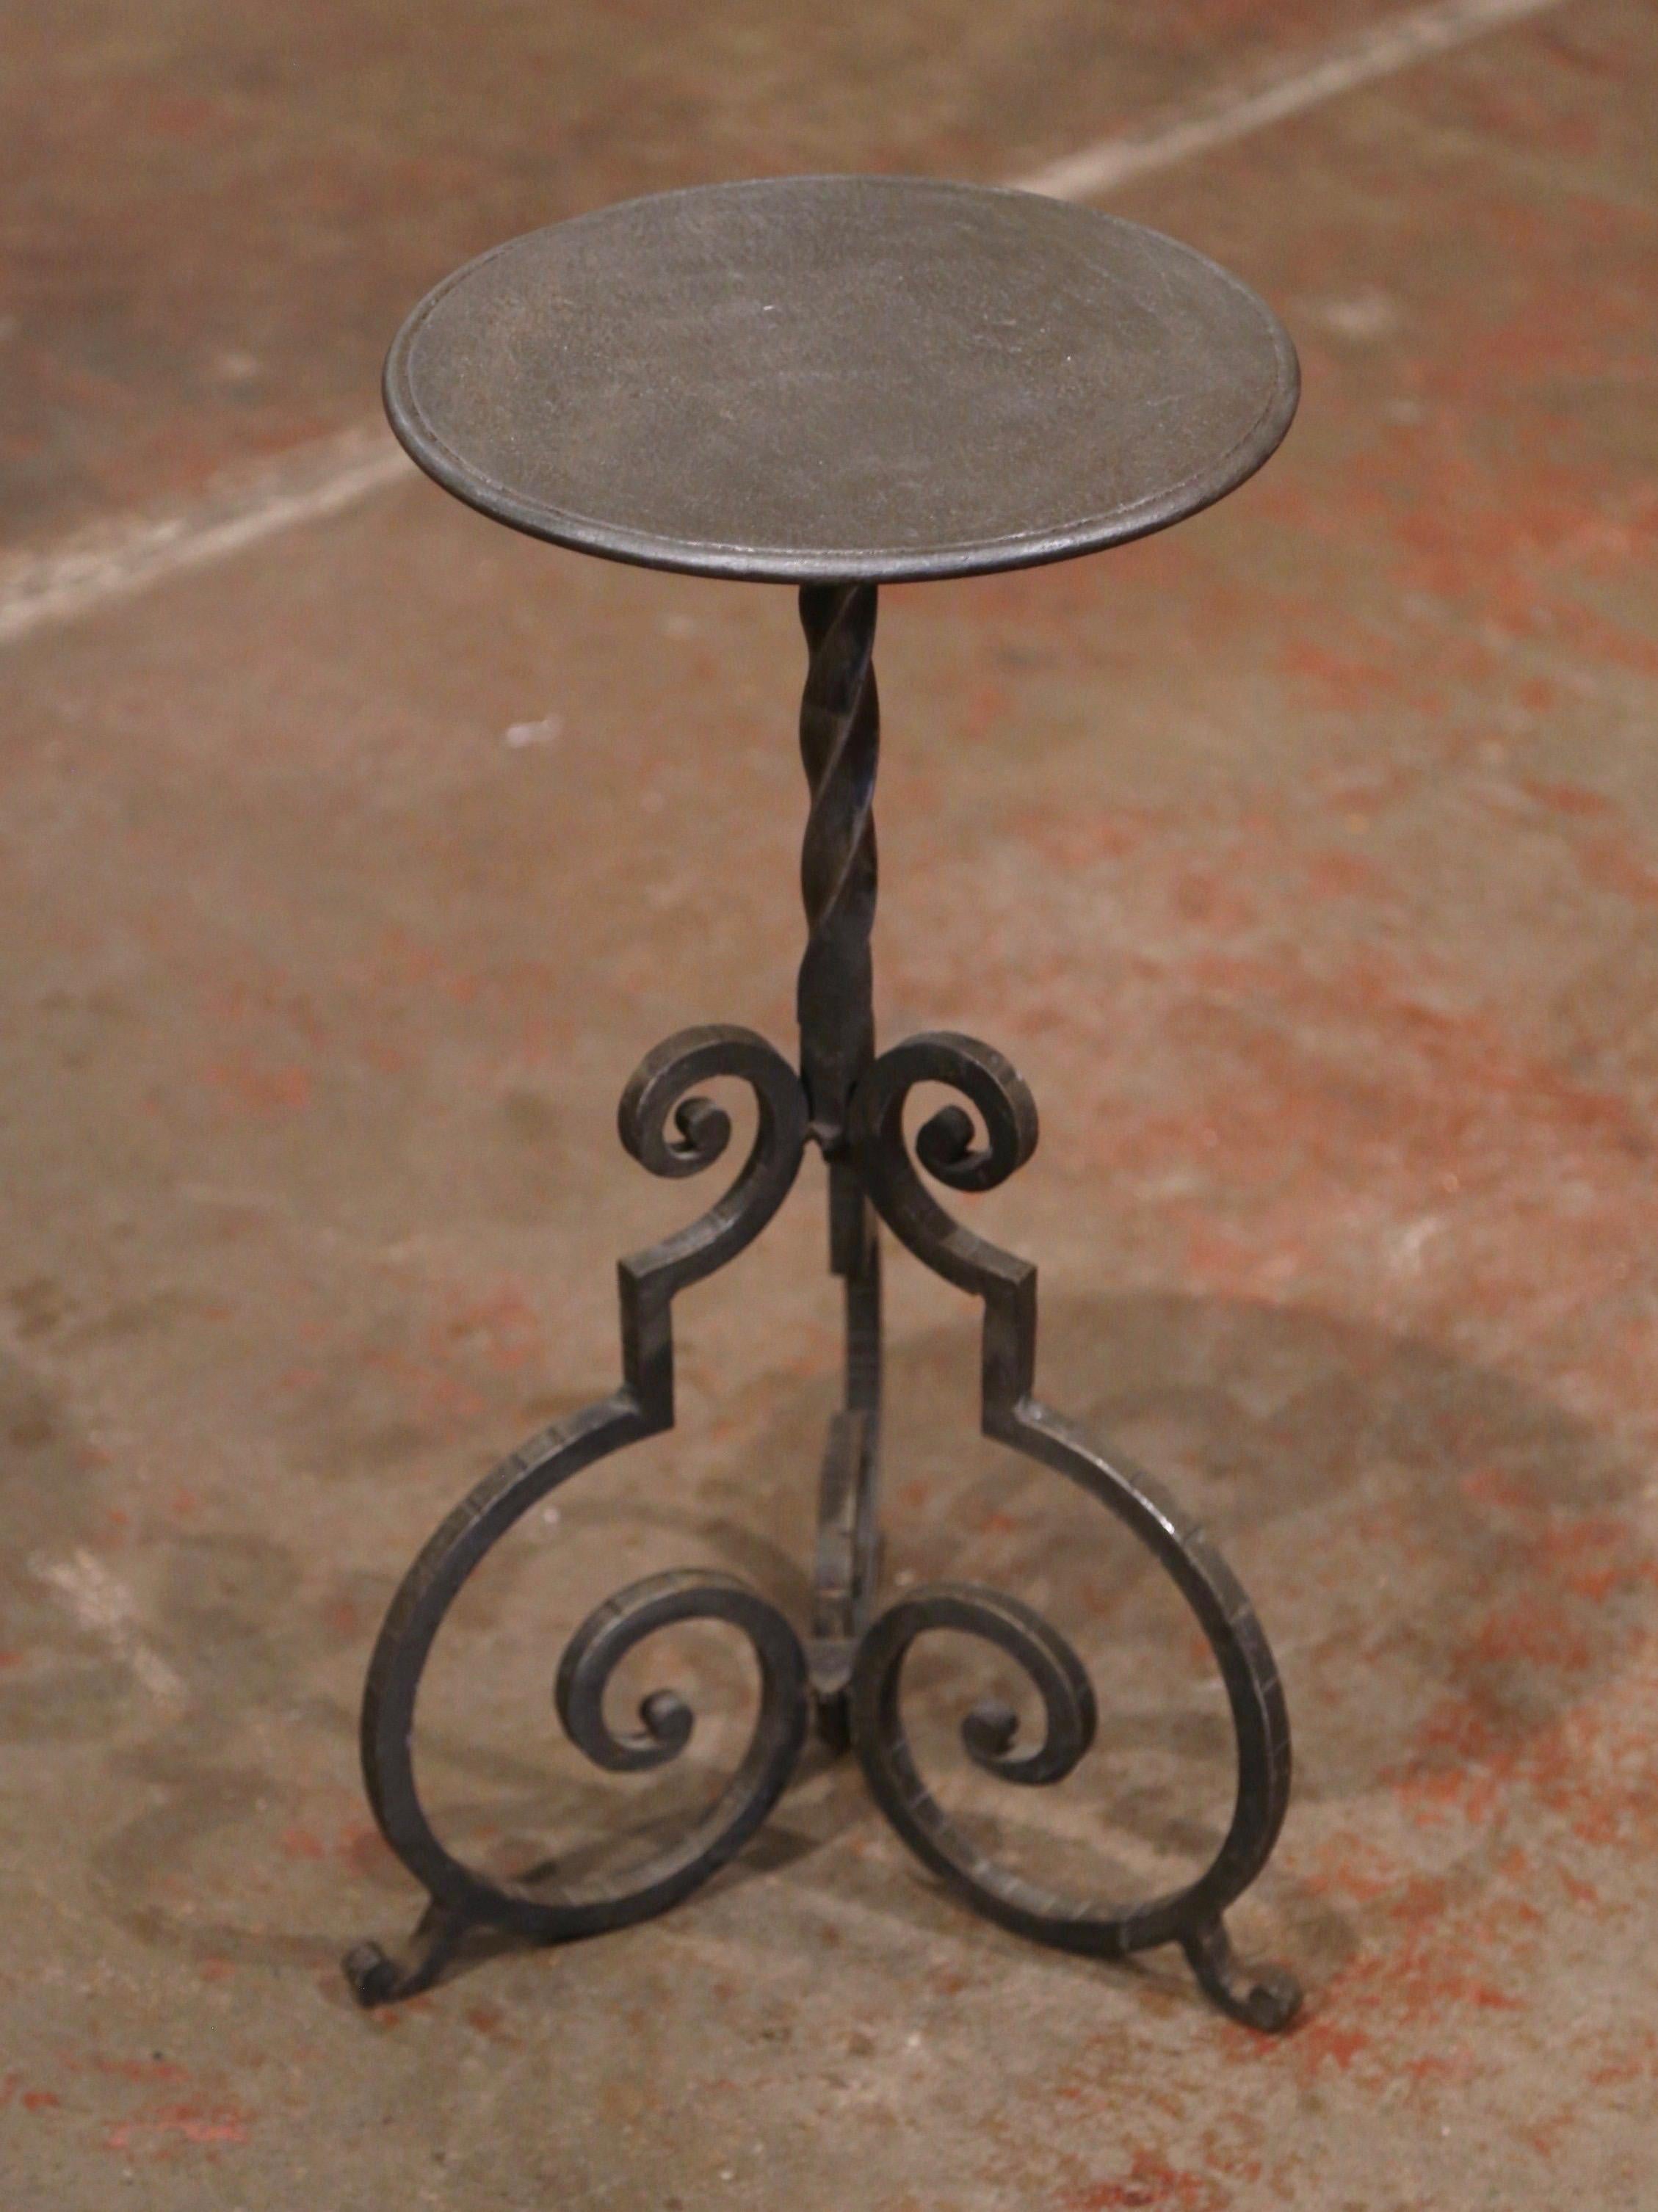 This elegant, antique Gothic pedestal table was crafted in Southern France, circa 1920. The intricate martini table features a forged central twisted pedestal stem embellished over three scroll feet. The petite table is topped with a round surface